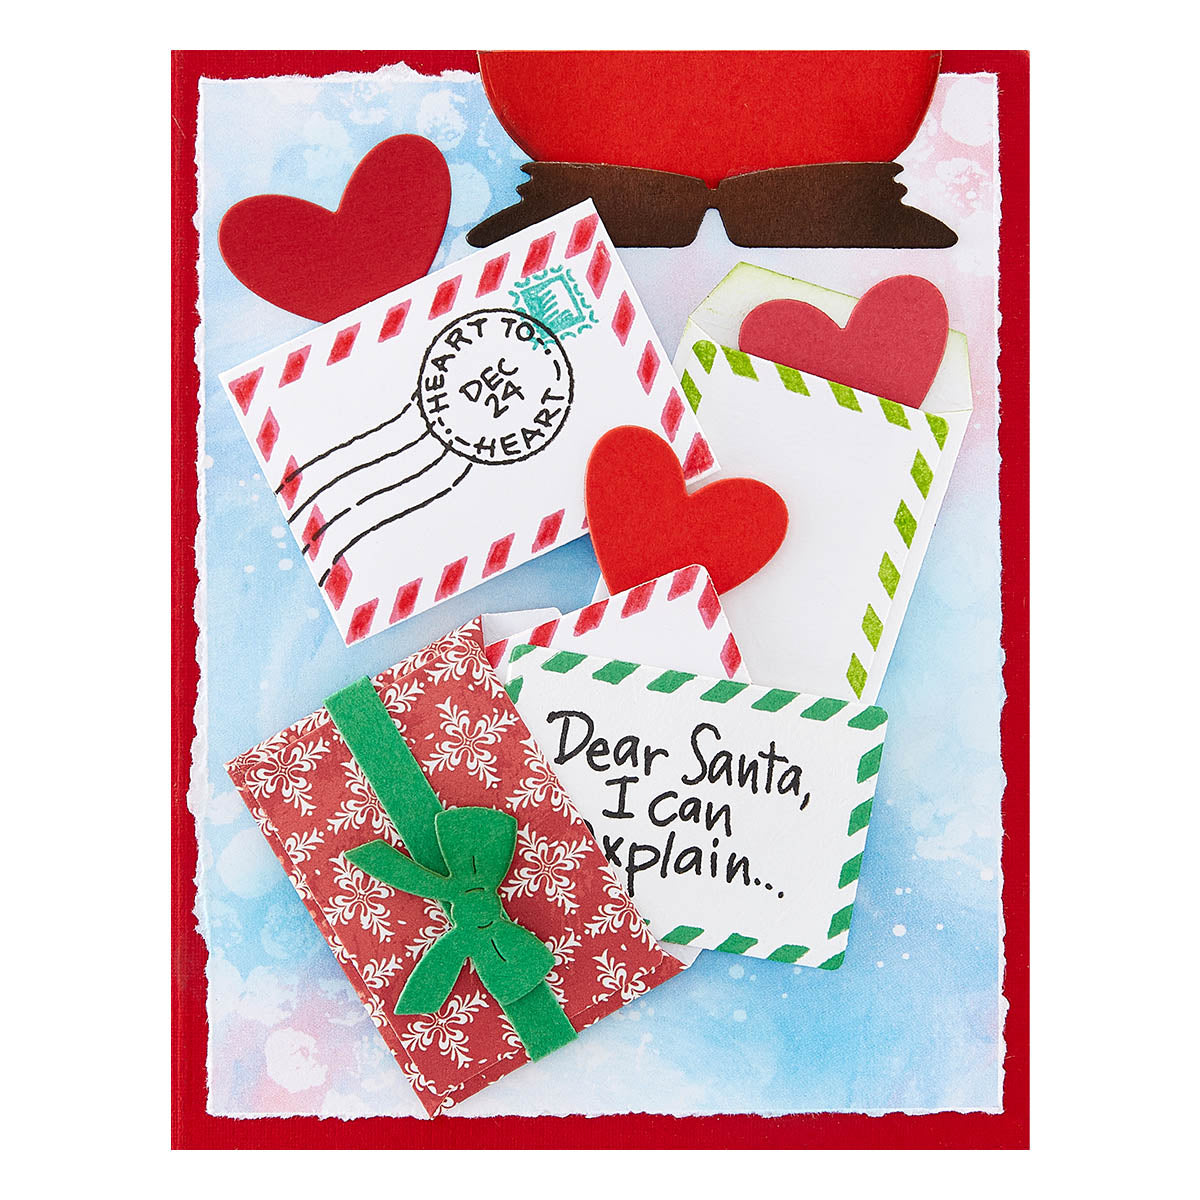 Holiday Hugs Sentiments Clear Stamp Set from the Holiday Hugs Collection by Stampendous